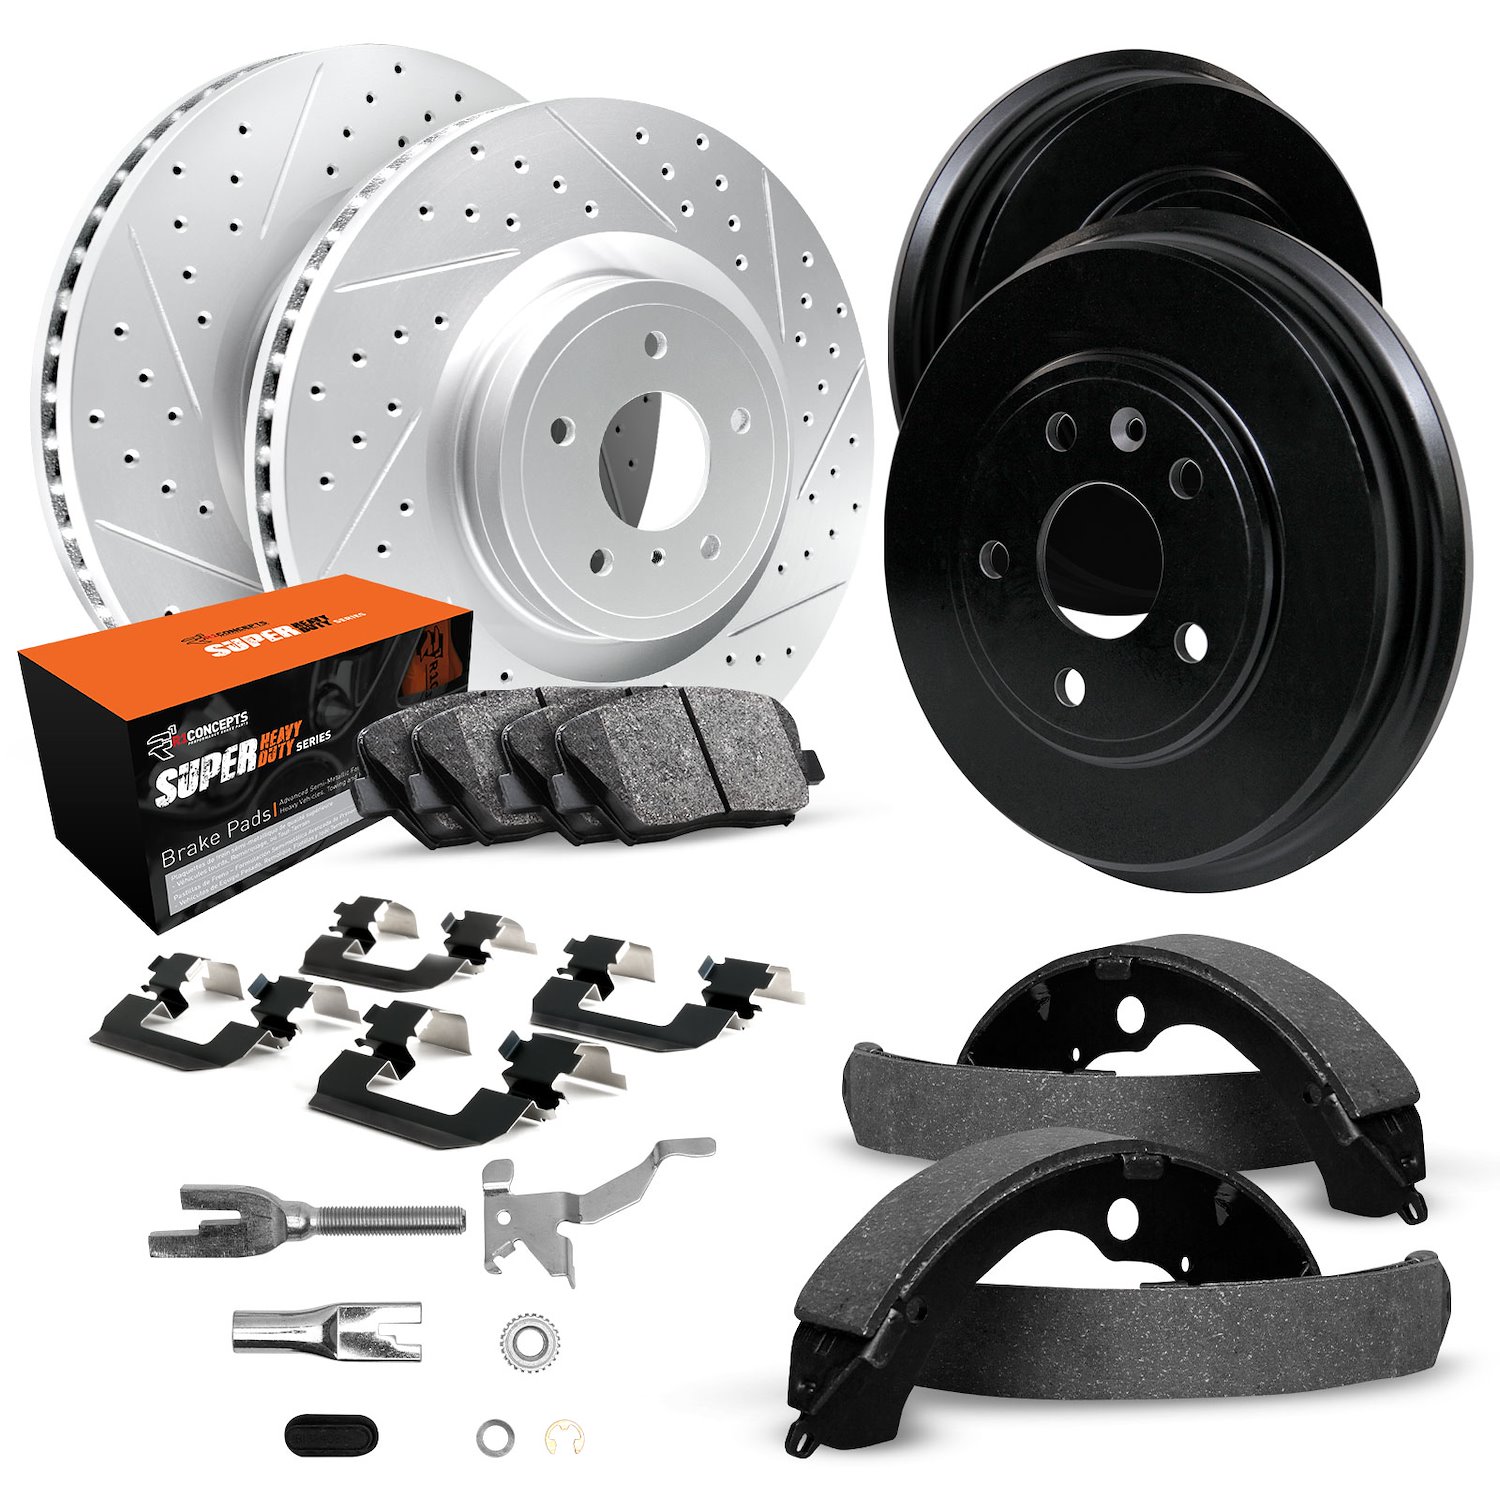 GEO-Carbon Drilled/Slotted Rotors/Drums w/Super-Duty Pads/Shoes/Hardware/Adjusters, 1997-1998 Mopar, Position: Front/Rear